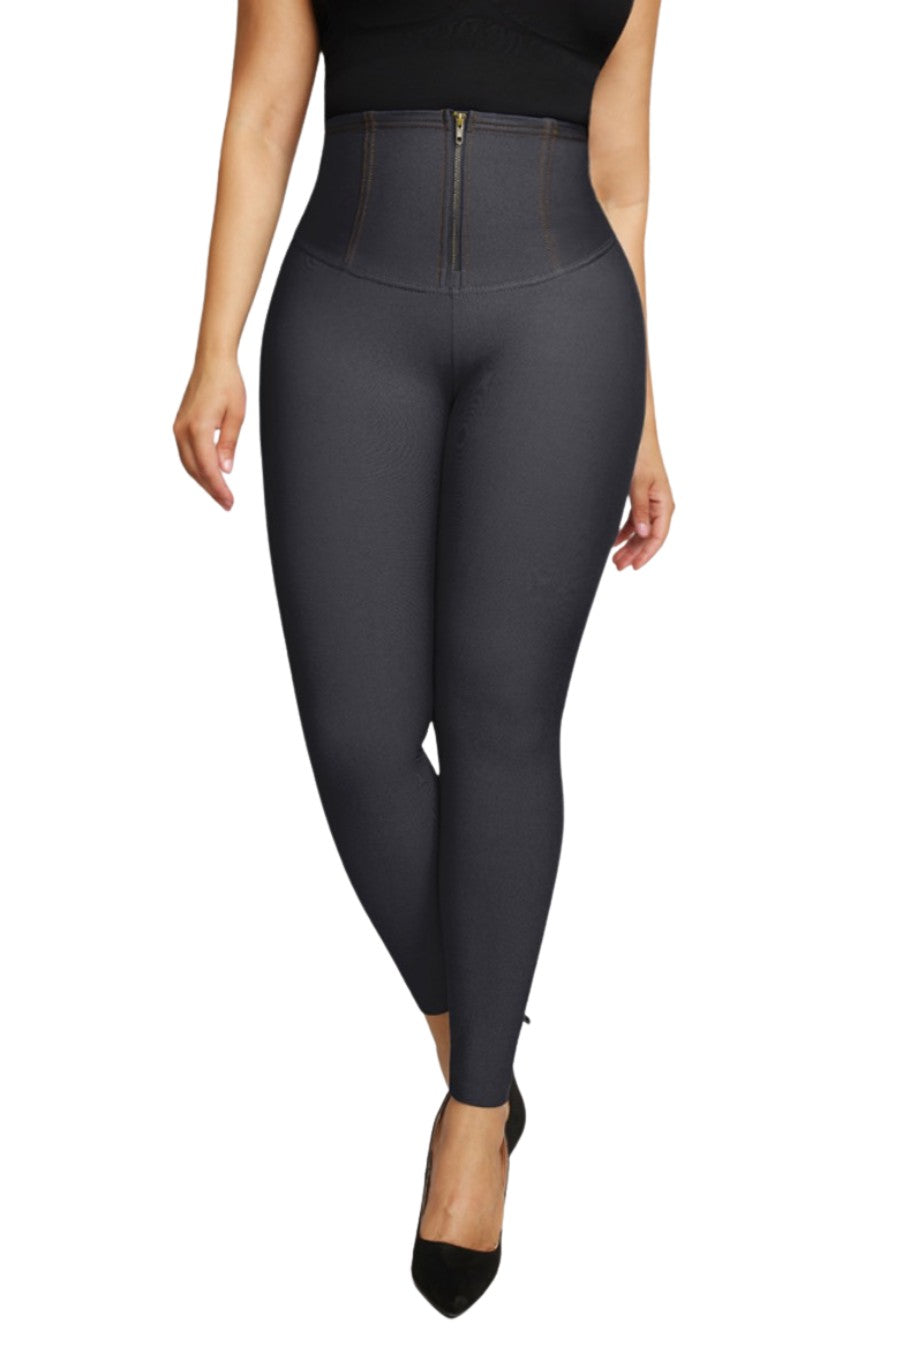 Shop the Best Shaping Leggings and Pants in Australia – Contour